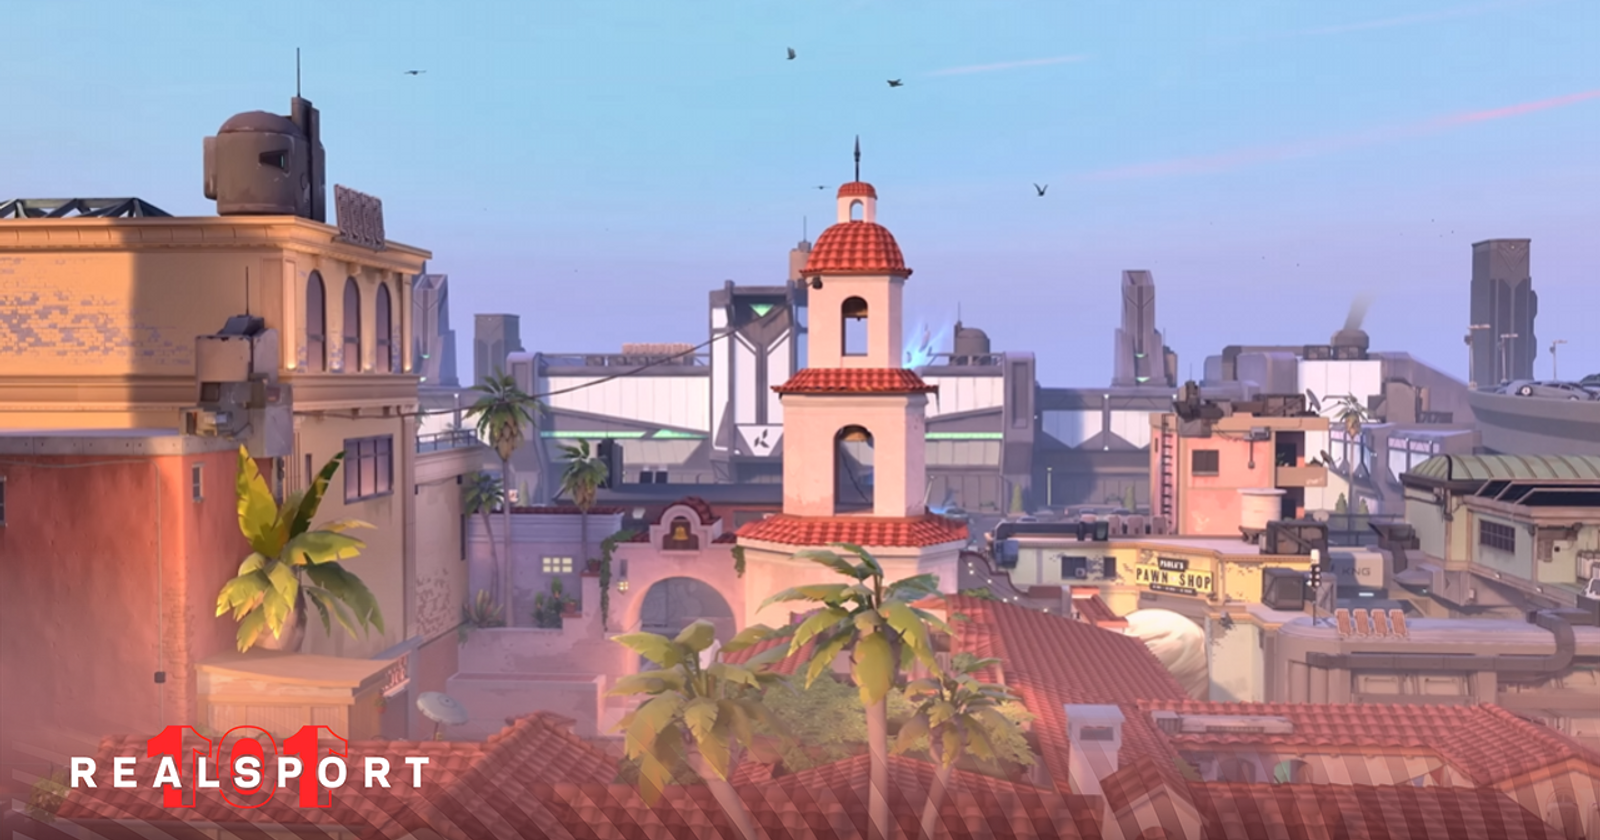 New 'Valorant' Map Sunset Based In LA And Is All About Mid Control